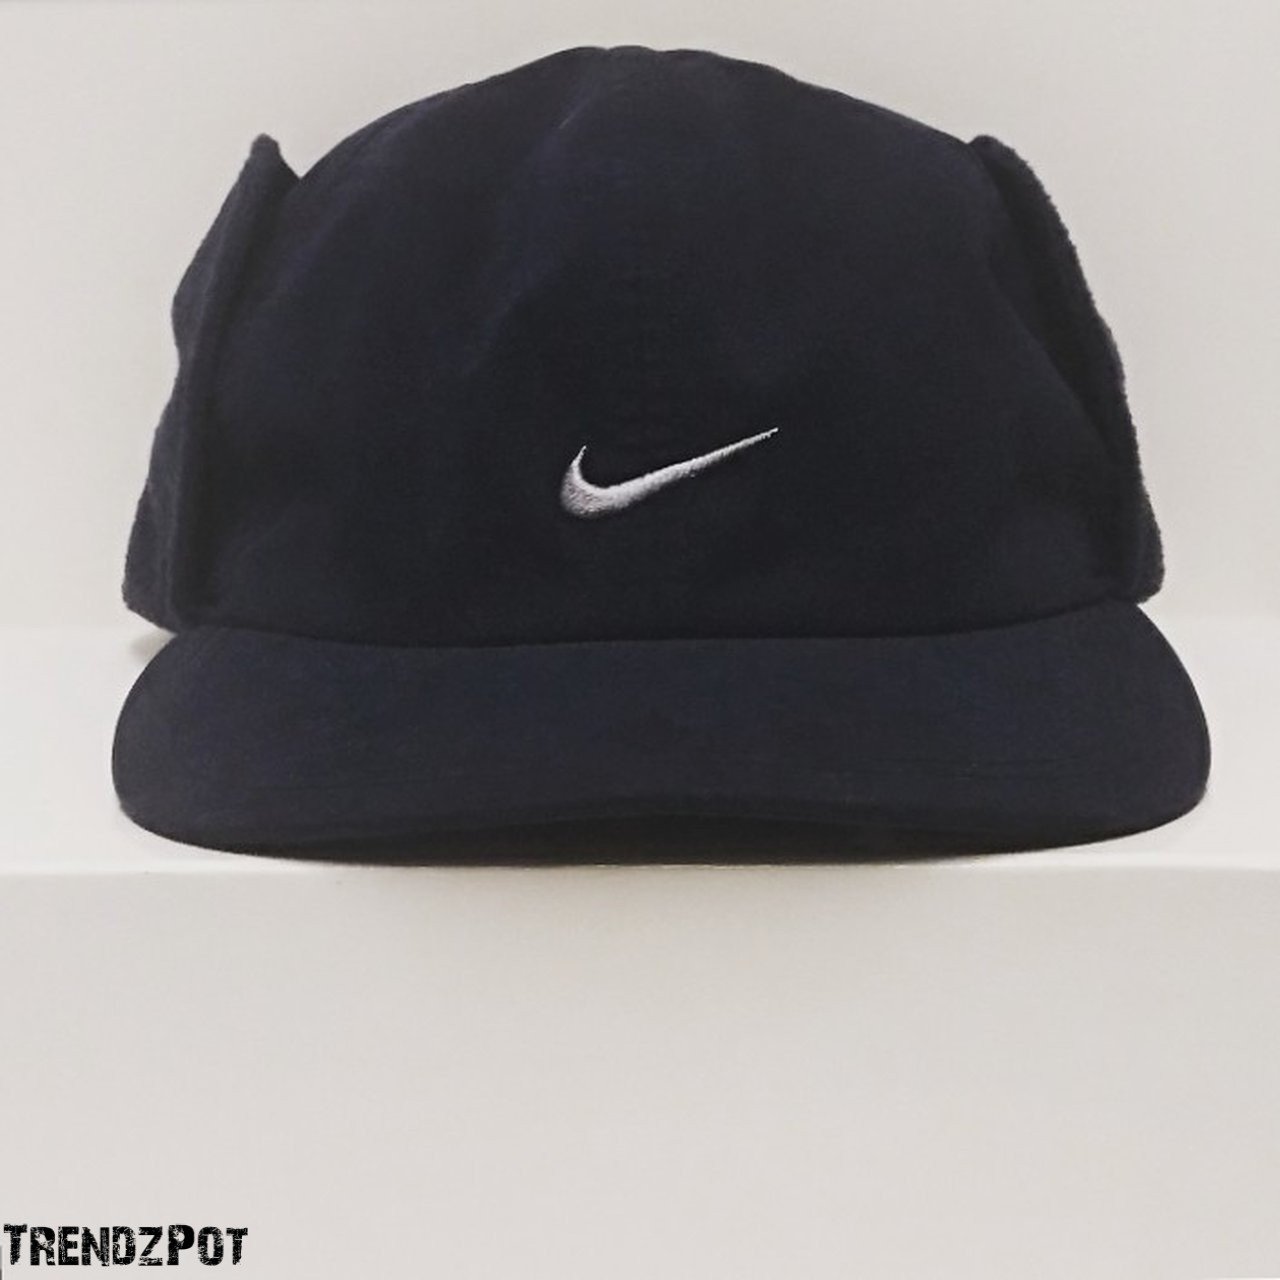 nike winter hat with ear flaps